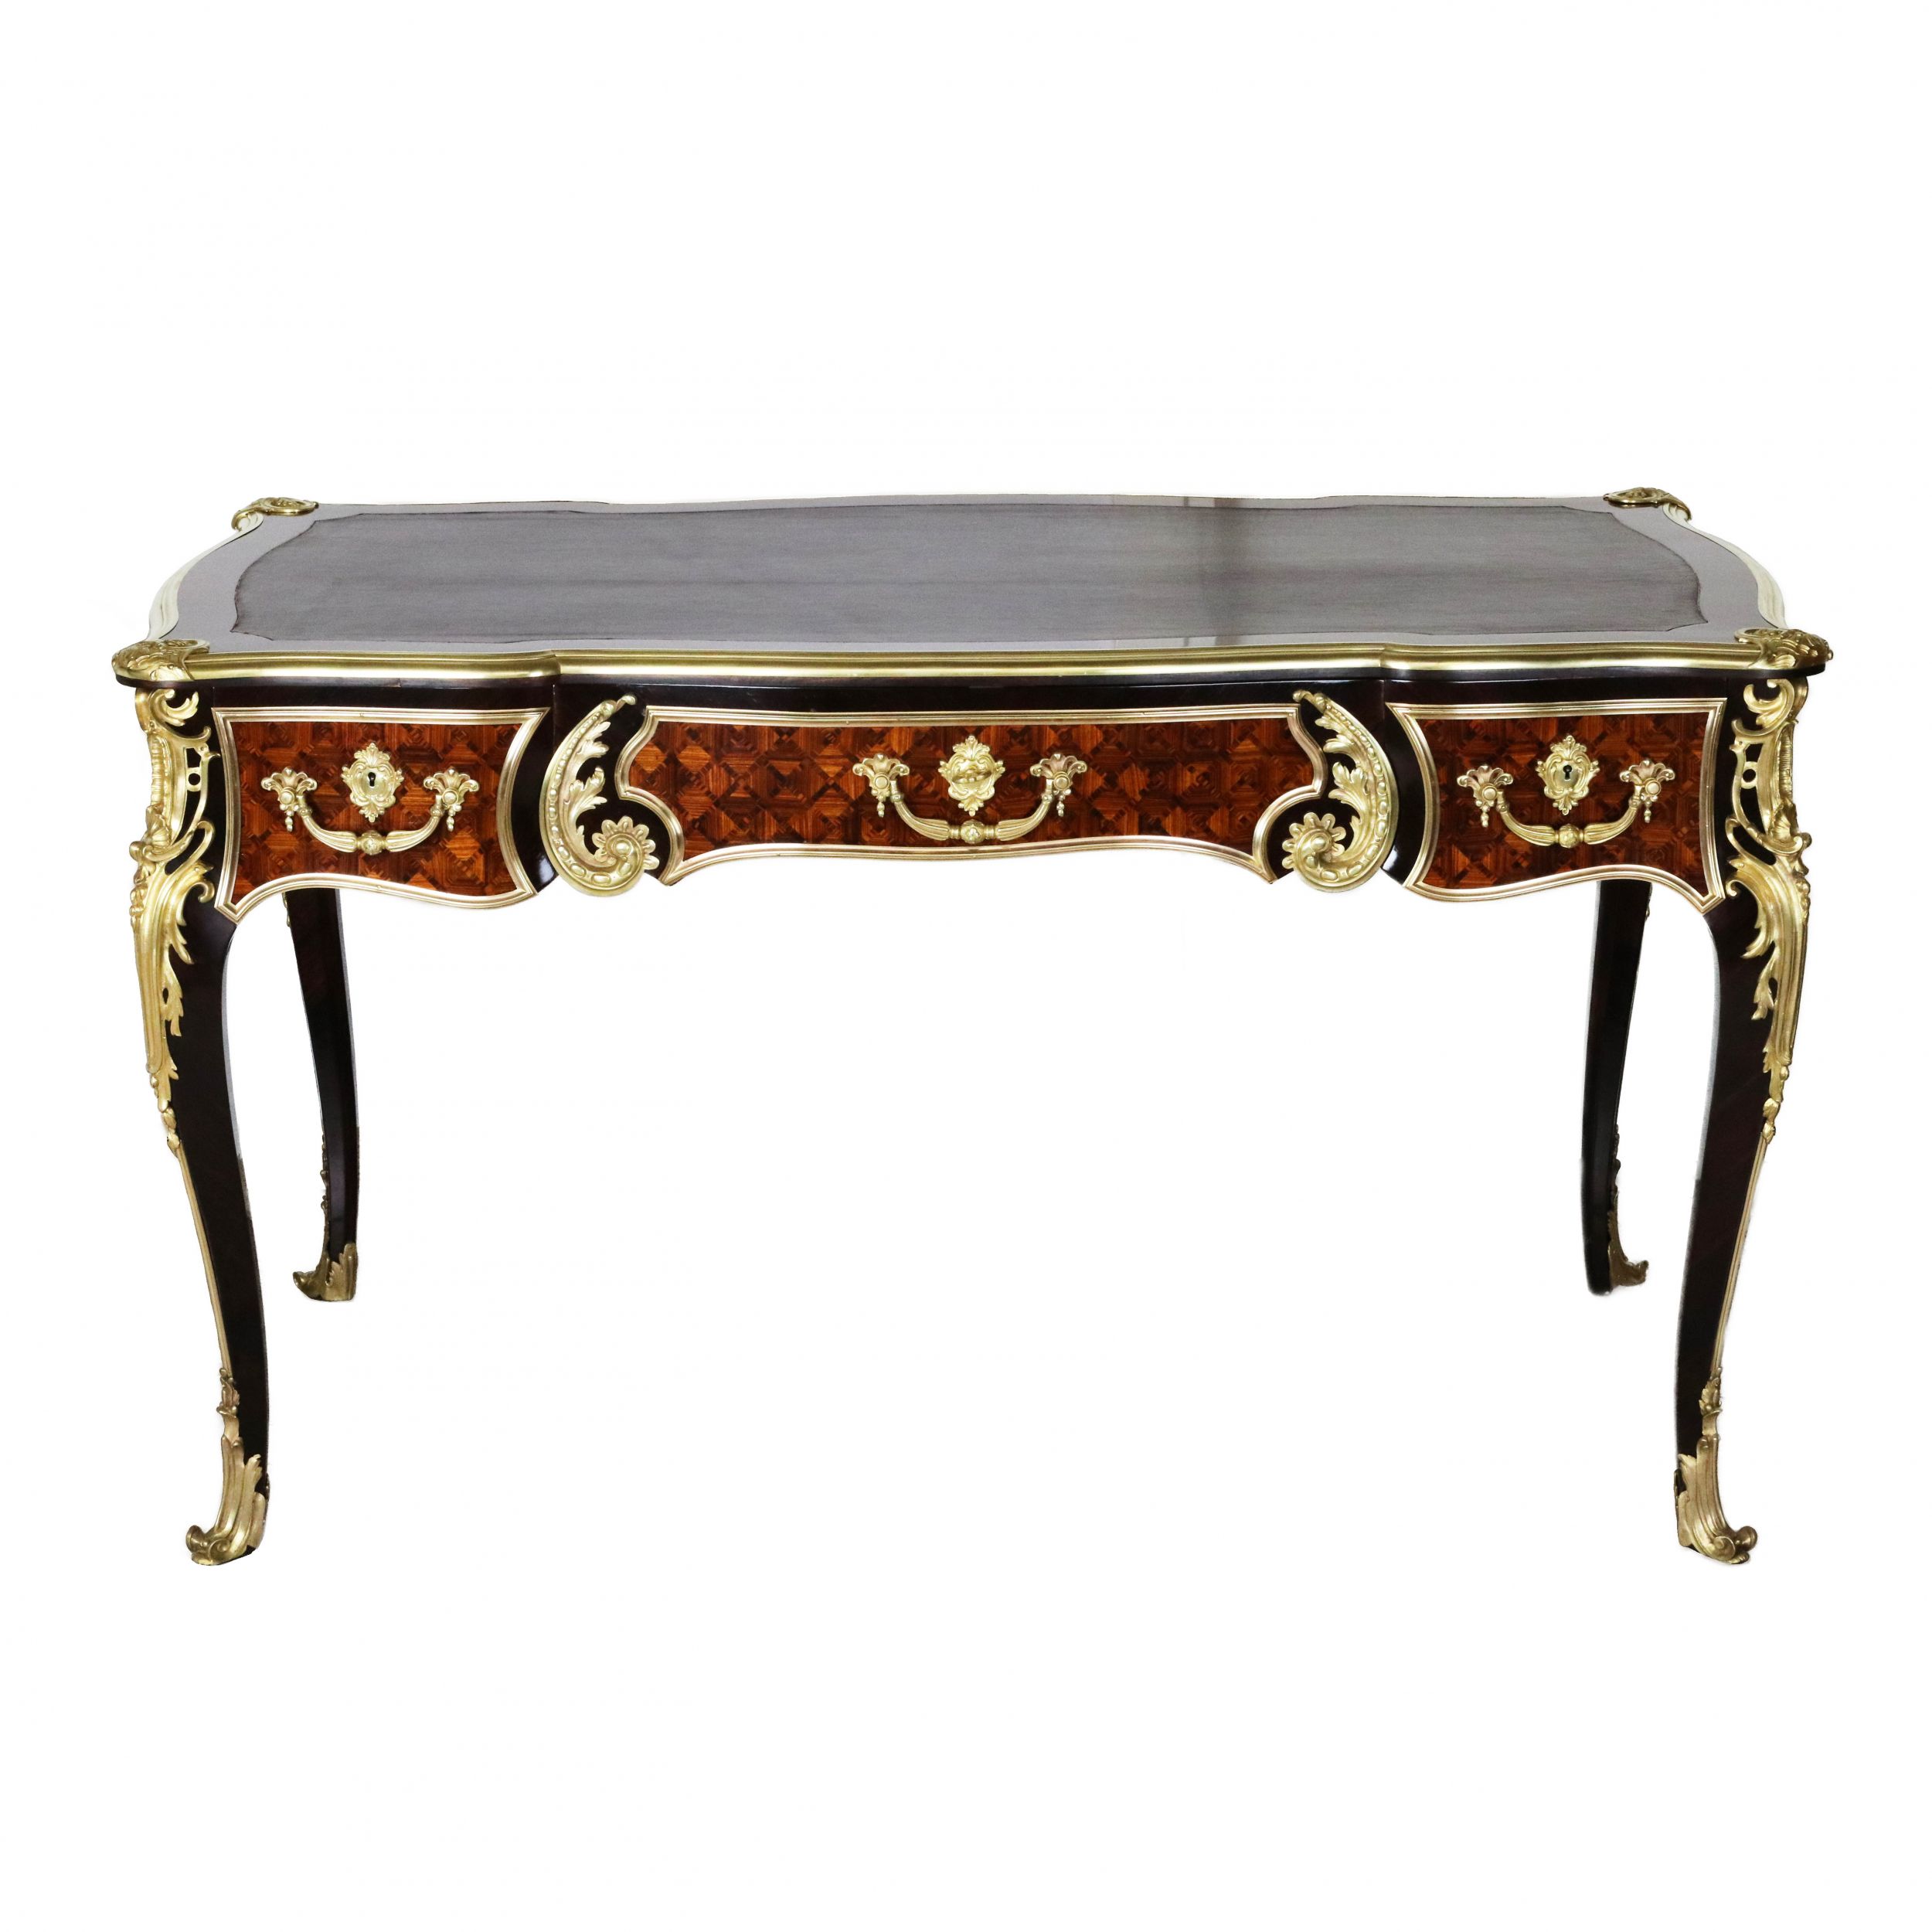 Magnificent writing desk in wood and gilded bronze, Louis XV style. - Image 2 of 8